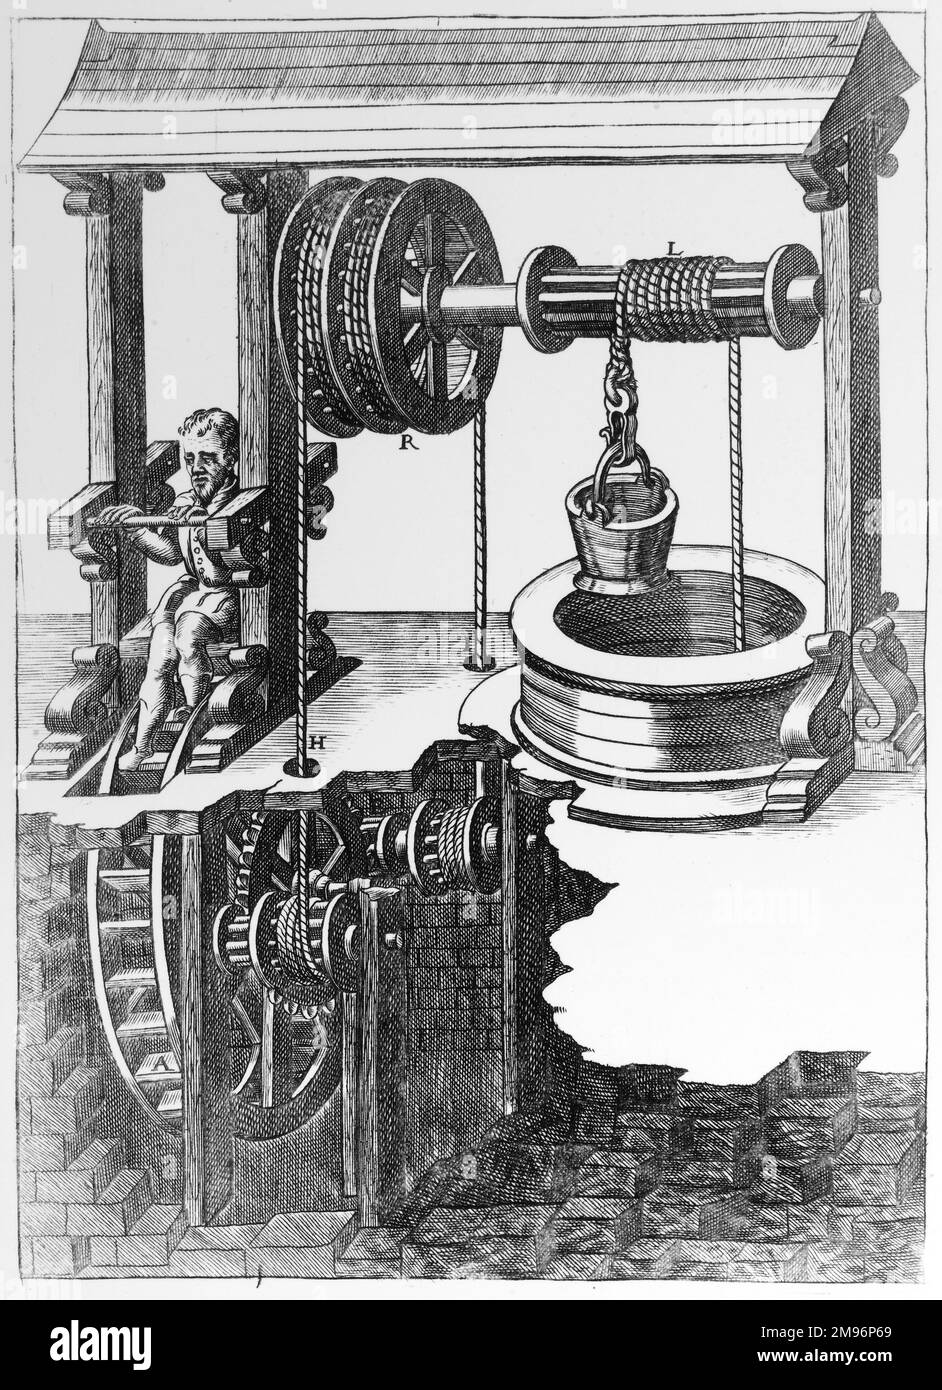 An engraving of a 1588 pedal powered well designed to use human strength to lift large quantities of underground stored water. Stock Photo